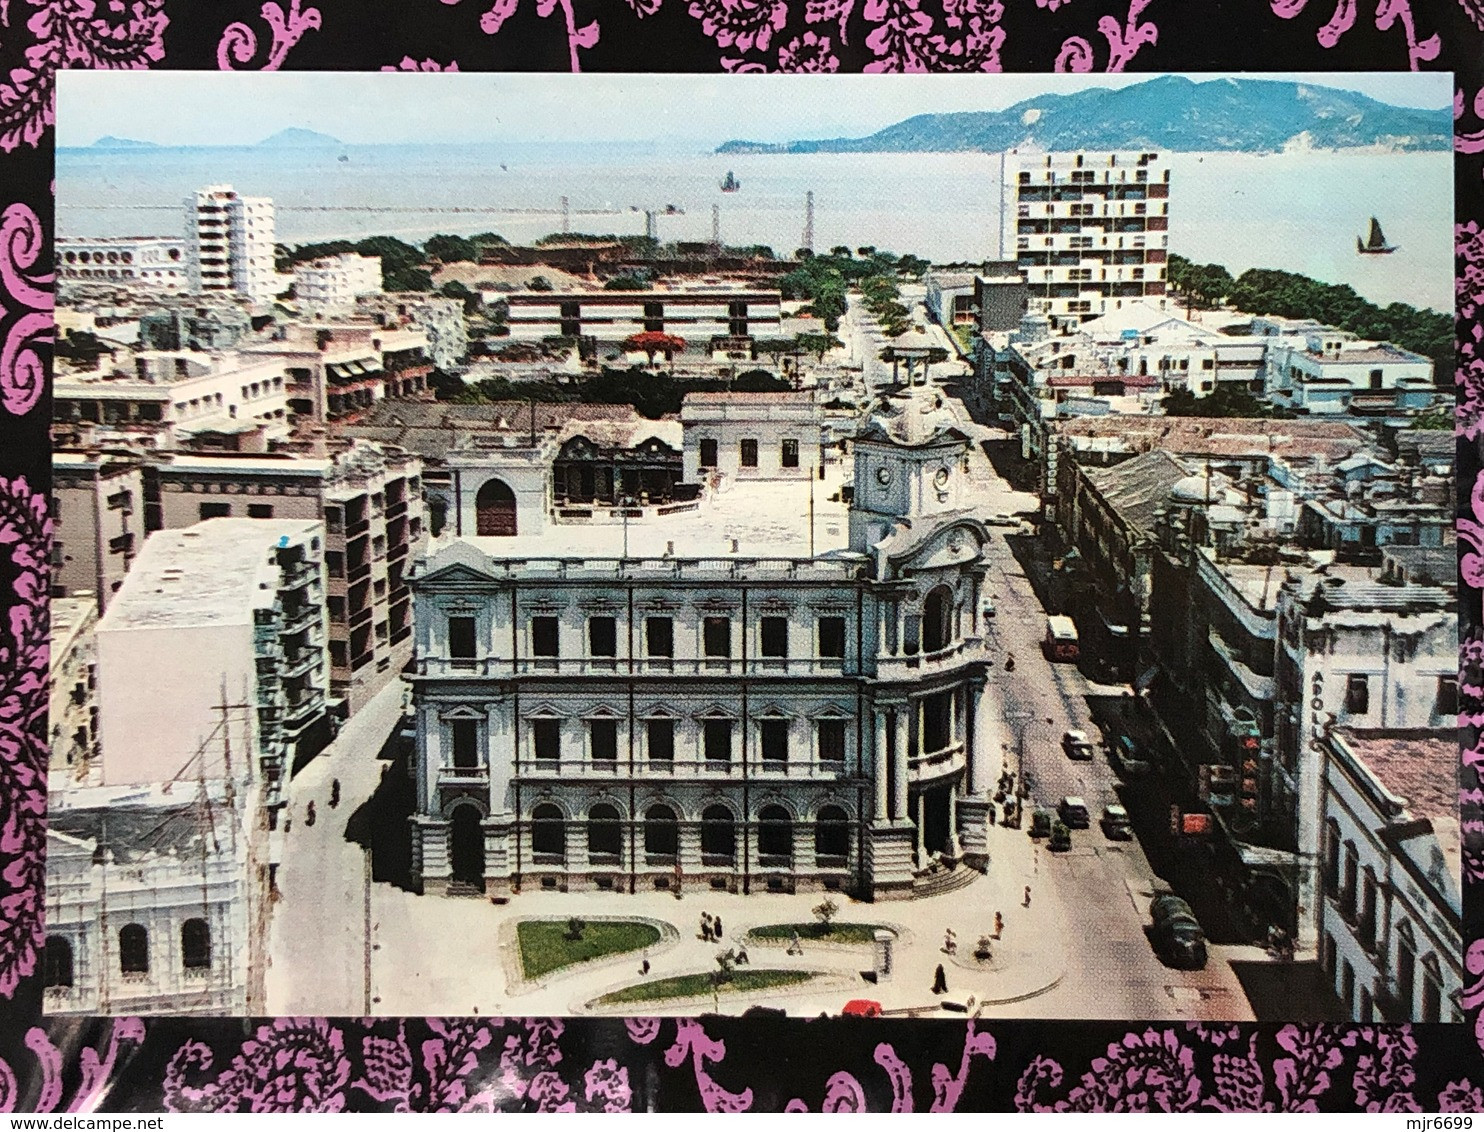 MACAU 1960'S GENERAL POST OFFICE & BUILDING THE CASINO LISBOA AT THE TOP END OF THE PHOTO, RARE - Macao